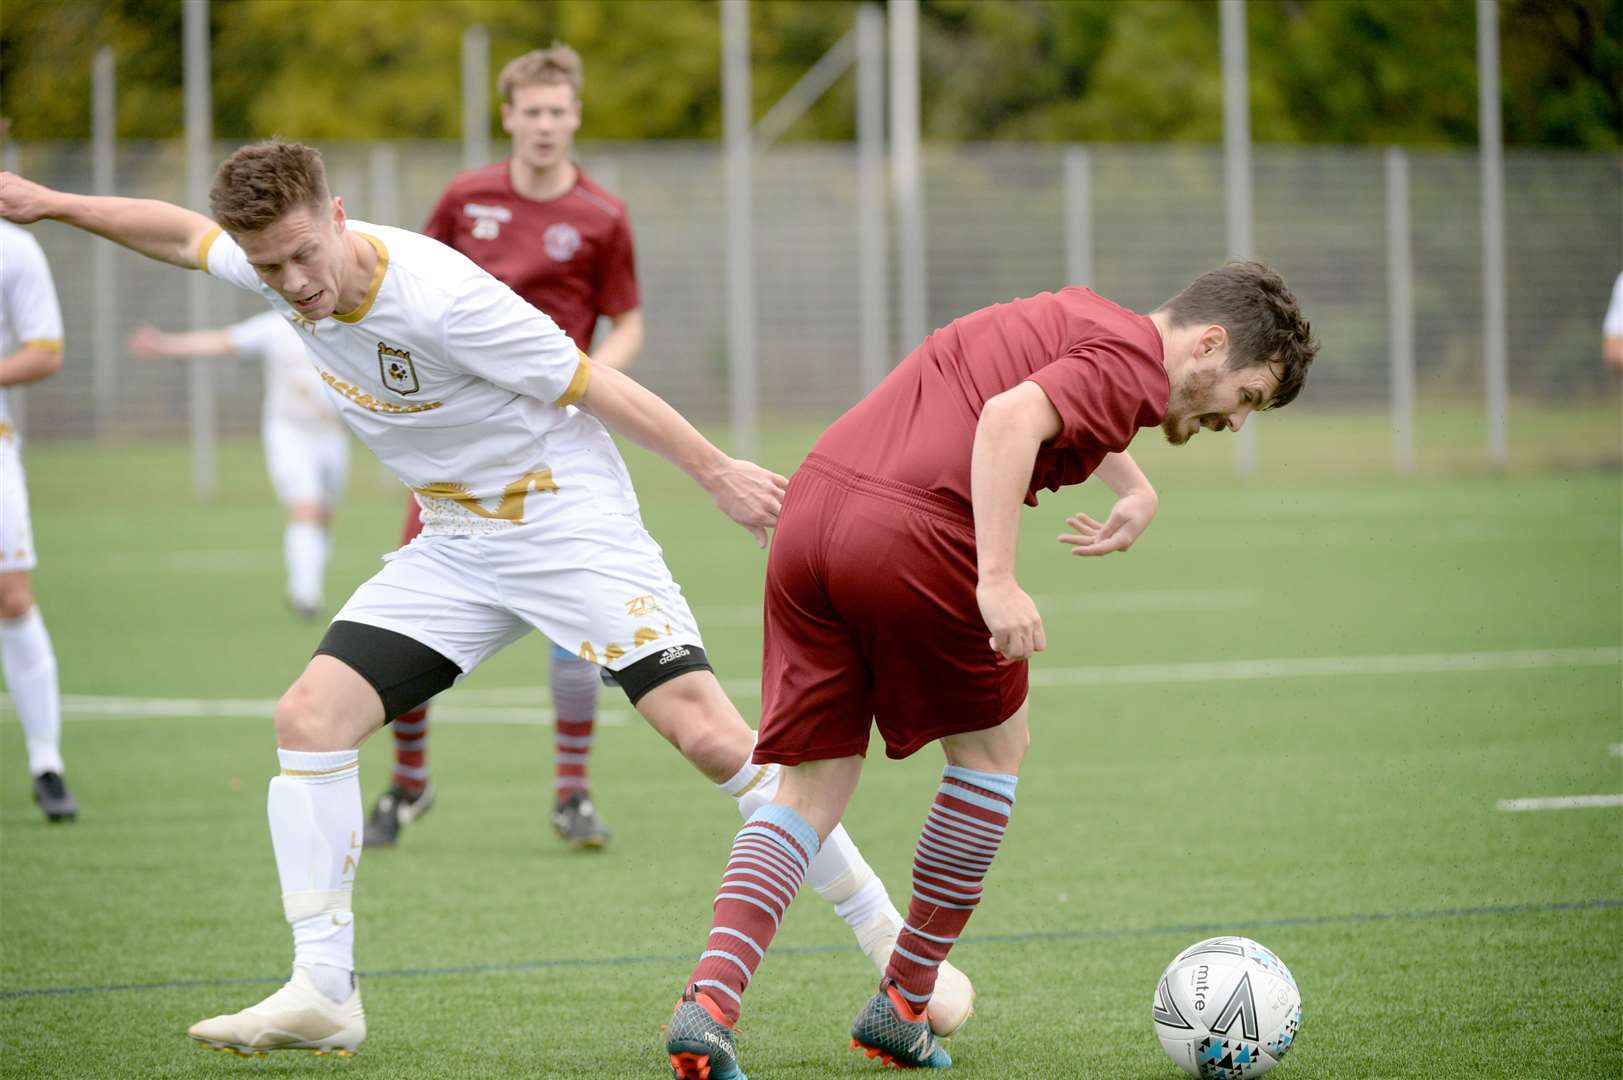 Loch Ness v Nairn St Ninian at Canal Park Inverness 10 October 2020..Craig Mainland of Loch Ness FC trying to make a tackle..Picture: James Mackenzie..